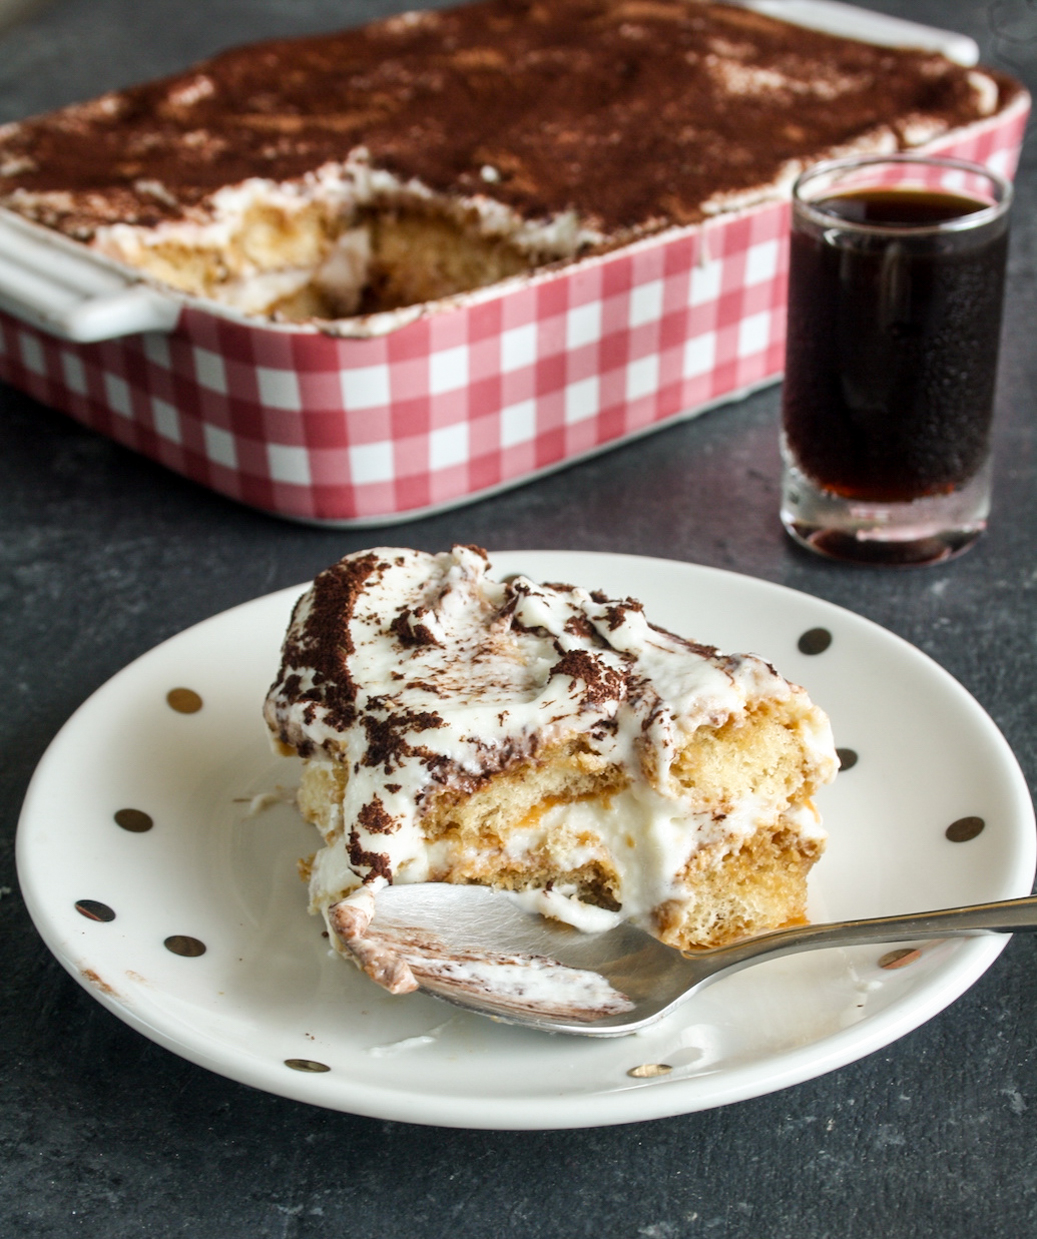 Light and creamy tiramisu with a lovely coffee flavour and eggless topping